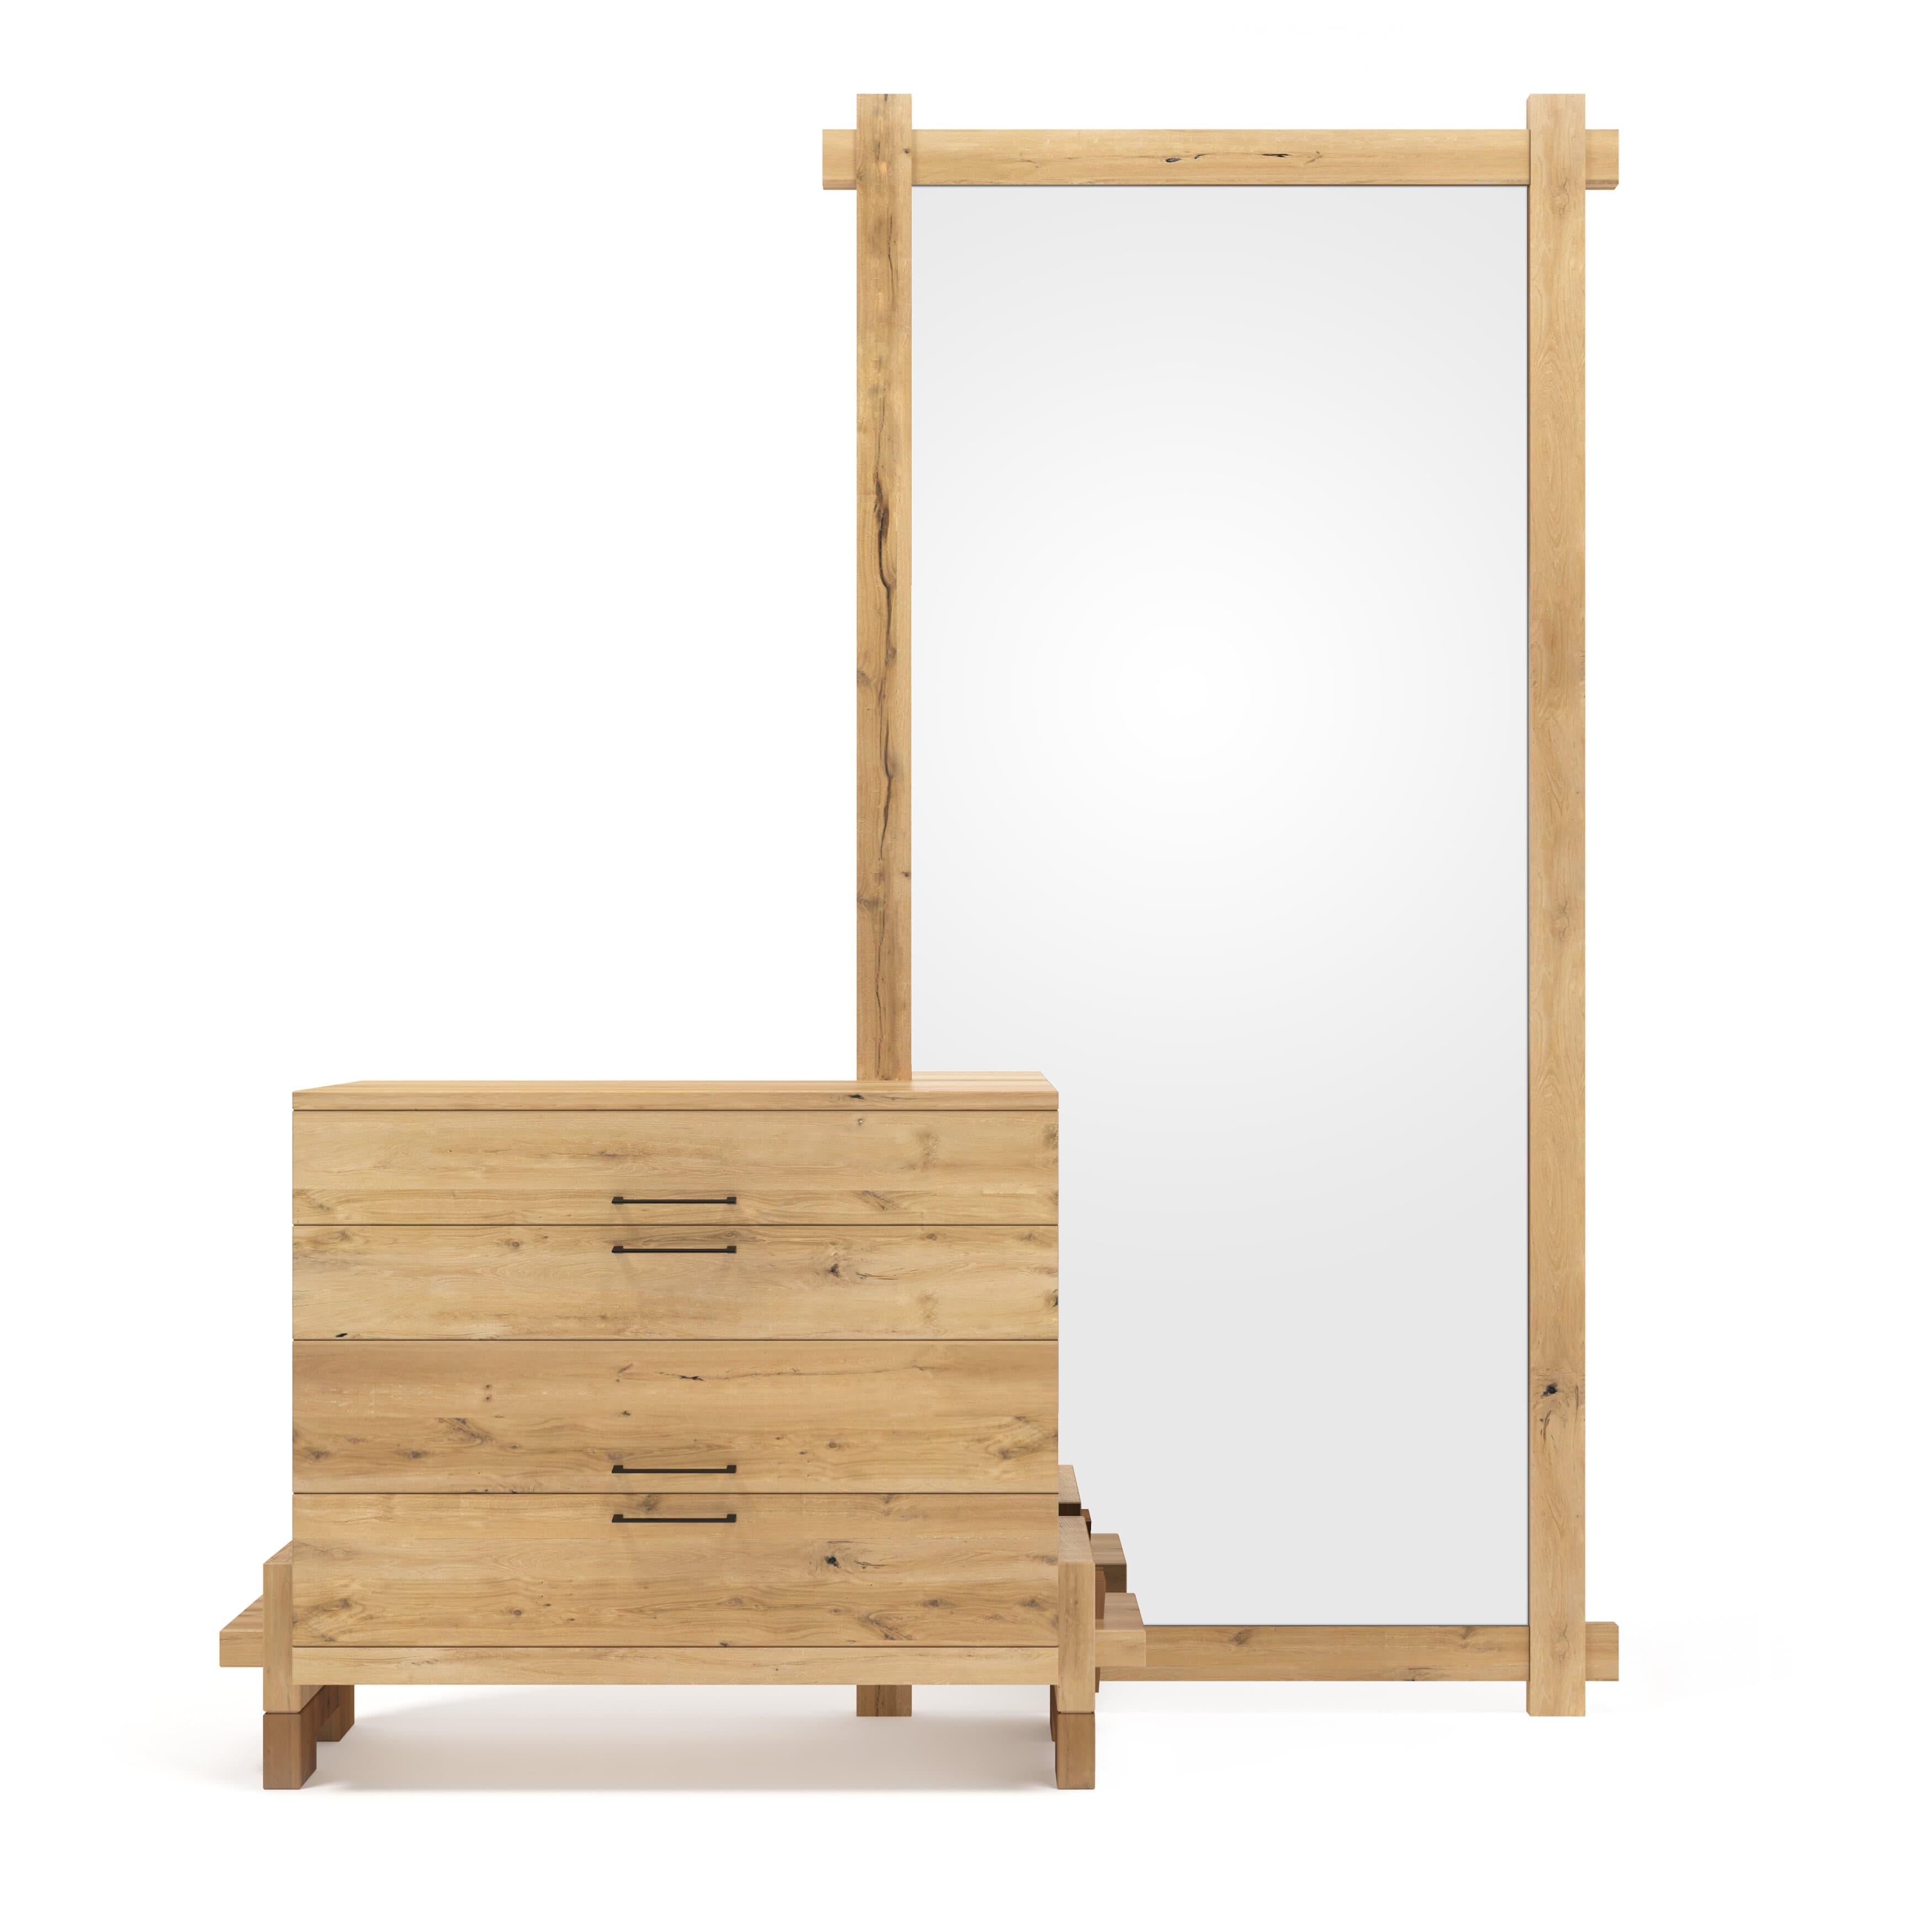 Introducing the Pana-Dresser02 - a unique and stylish storage solution that promises to make a statement! Its large mirror allows you to get ready quickly and easily in the morning, while the ample storage ensures your bedroom stays organized.